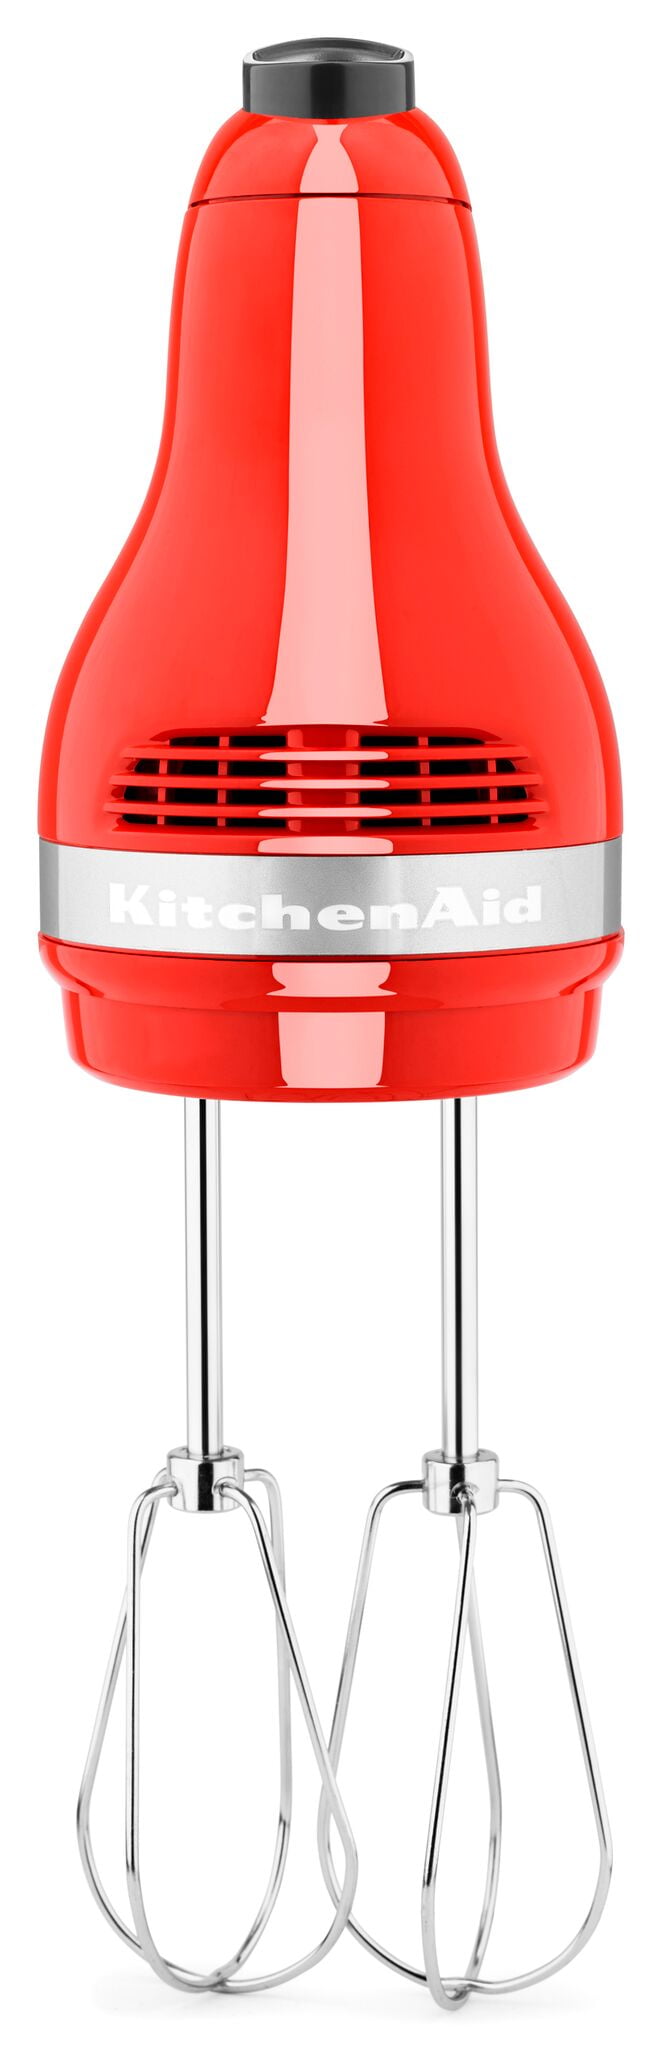 KitchenAid Ultra Power 5-Speed Twilight Blue Hand Mixer with 2 Stainless  Steel Beaters KHM512TB - The Home Depot